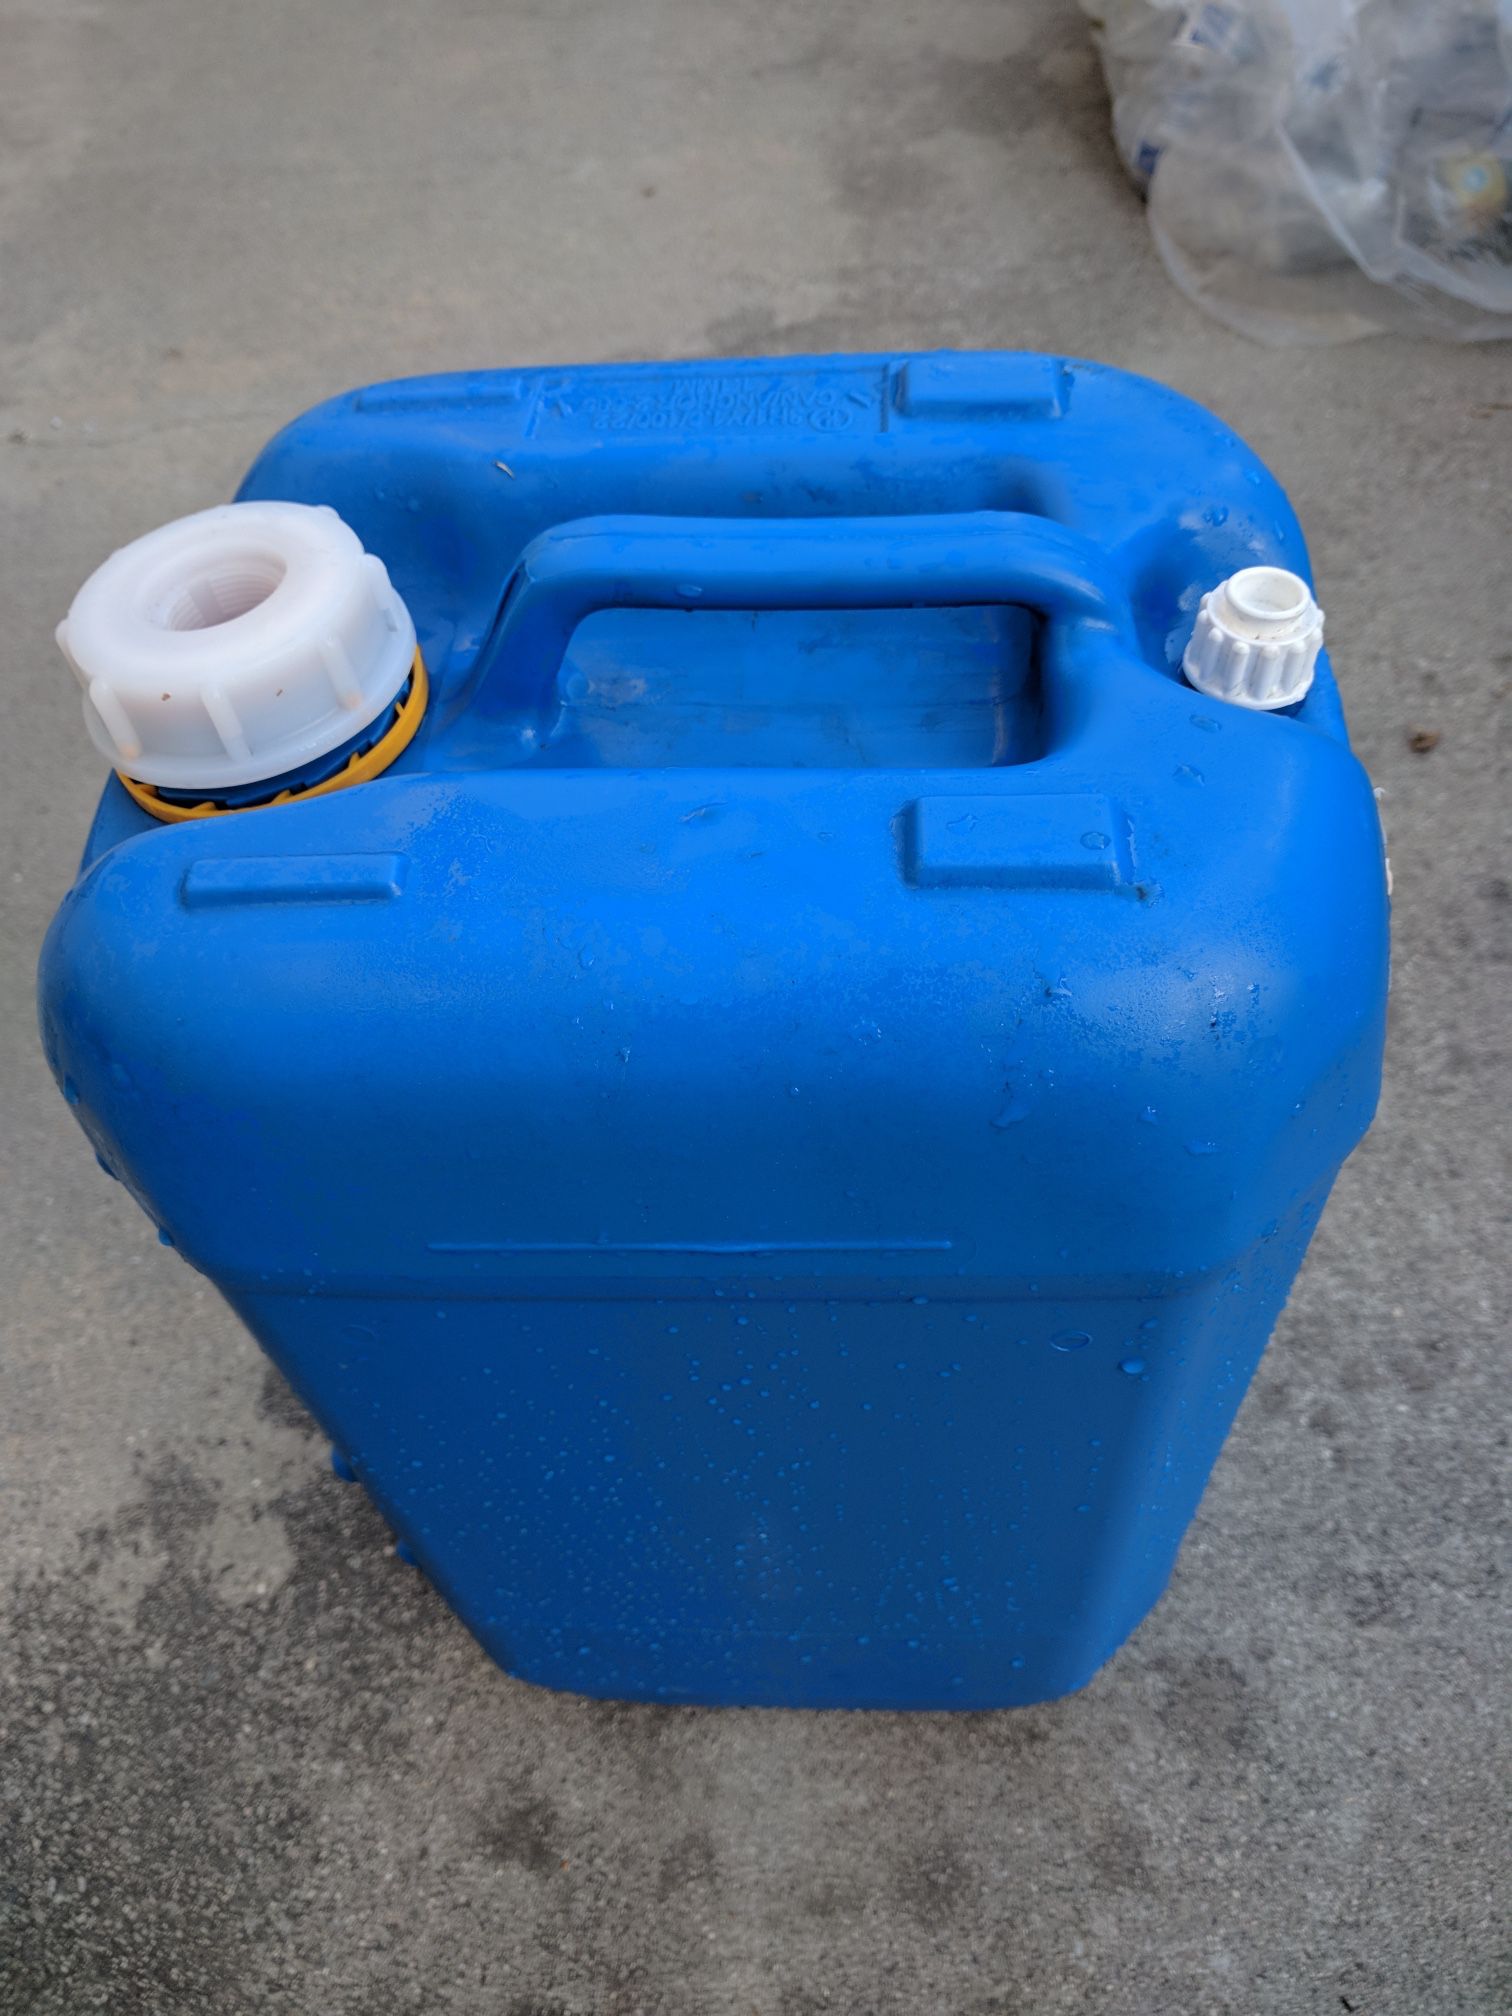 7 Gallons Blue Plastic Jugs Containers 